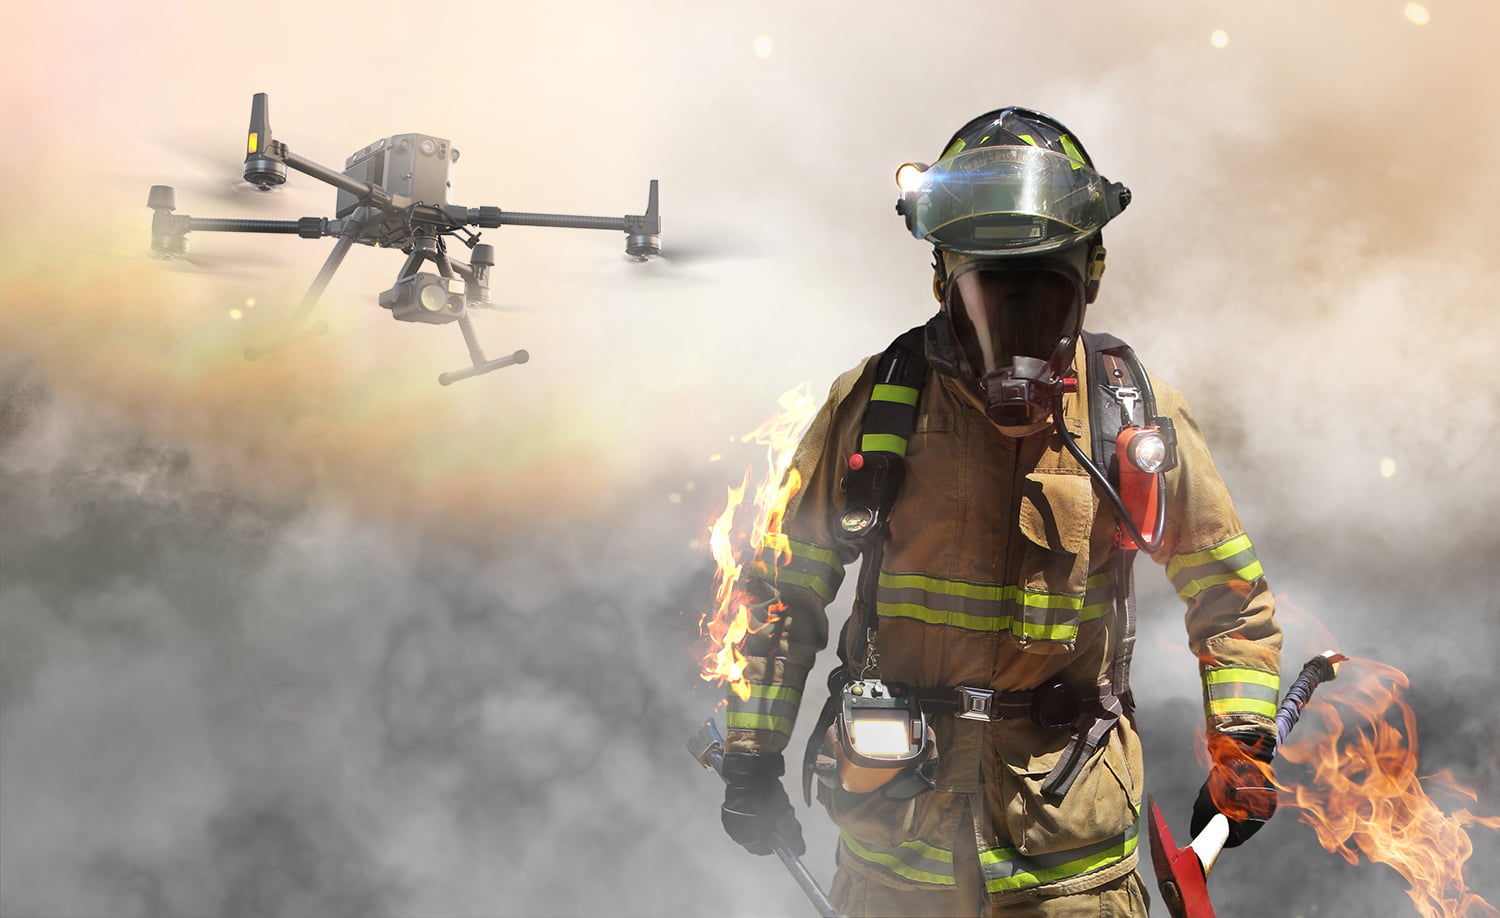 Drones in Emergency Response and Disaster Relief